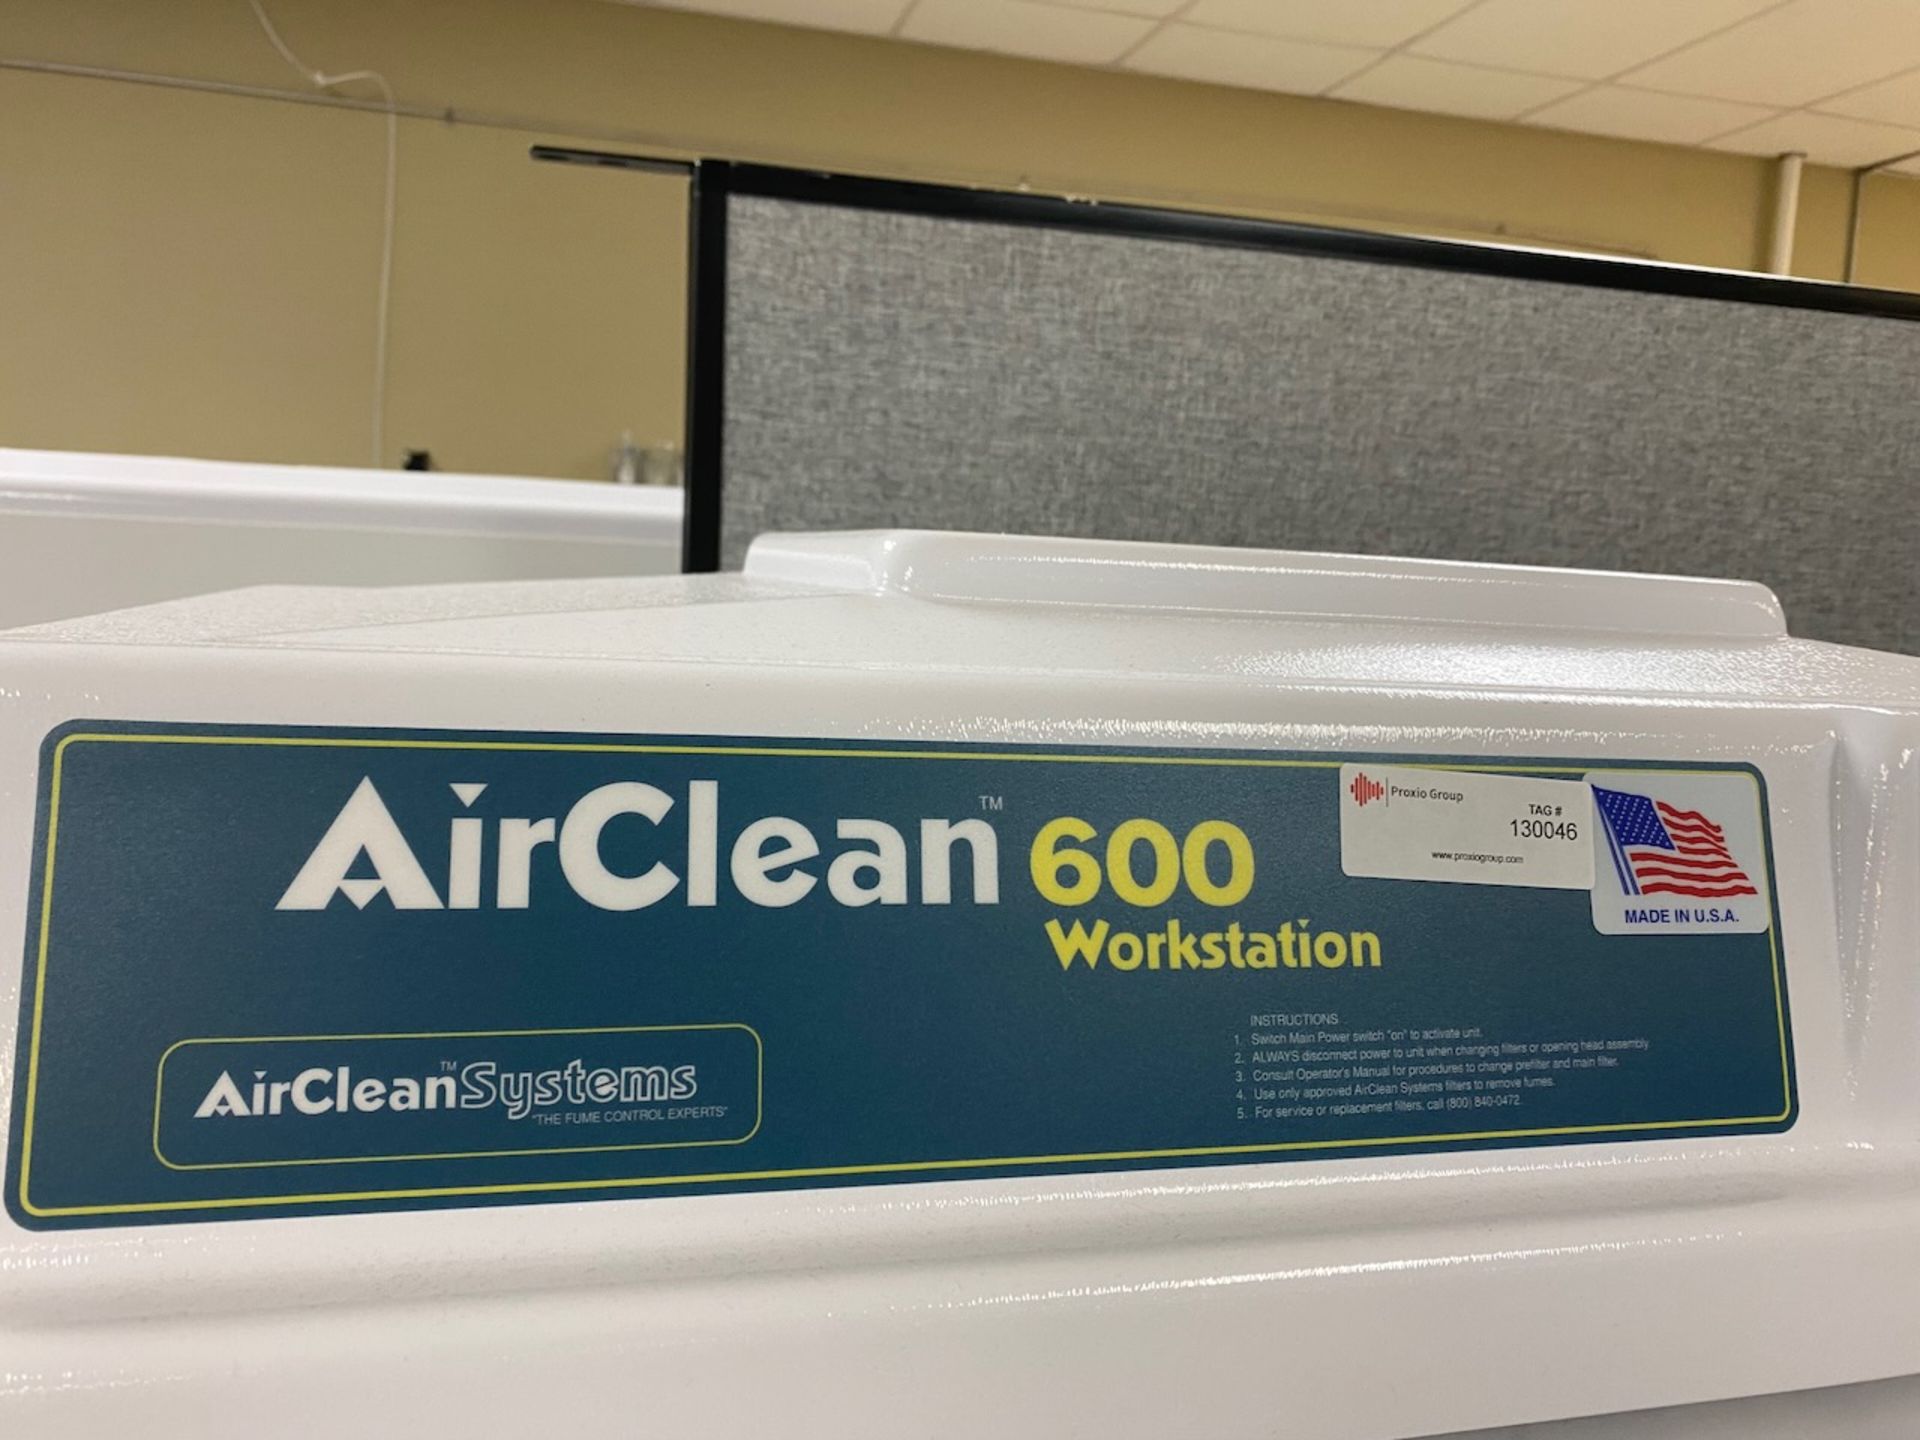 Airclean 600 Workstation - Image 2 of 4